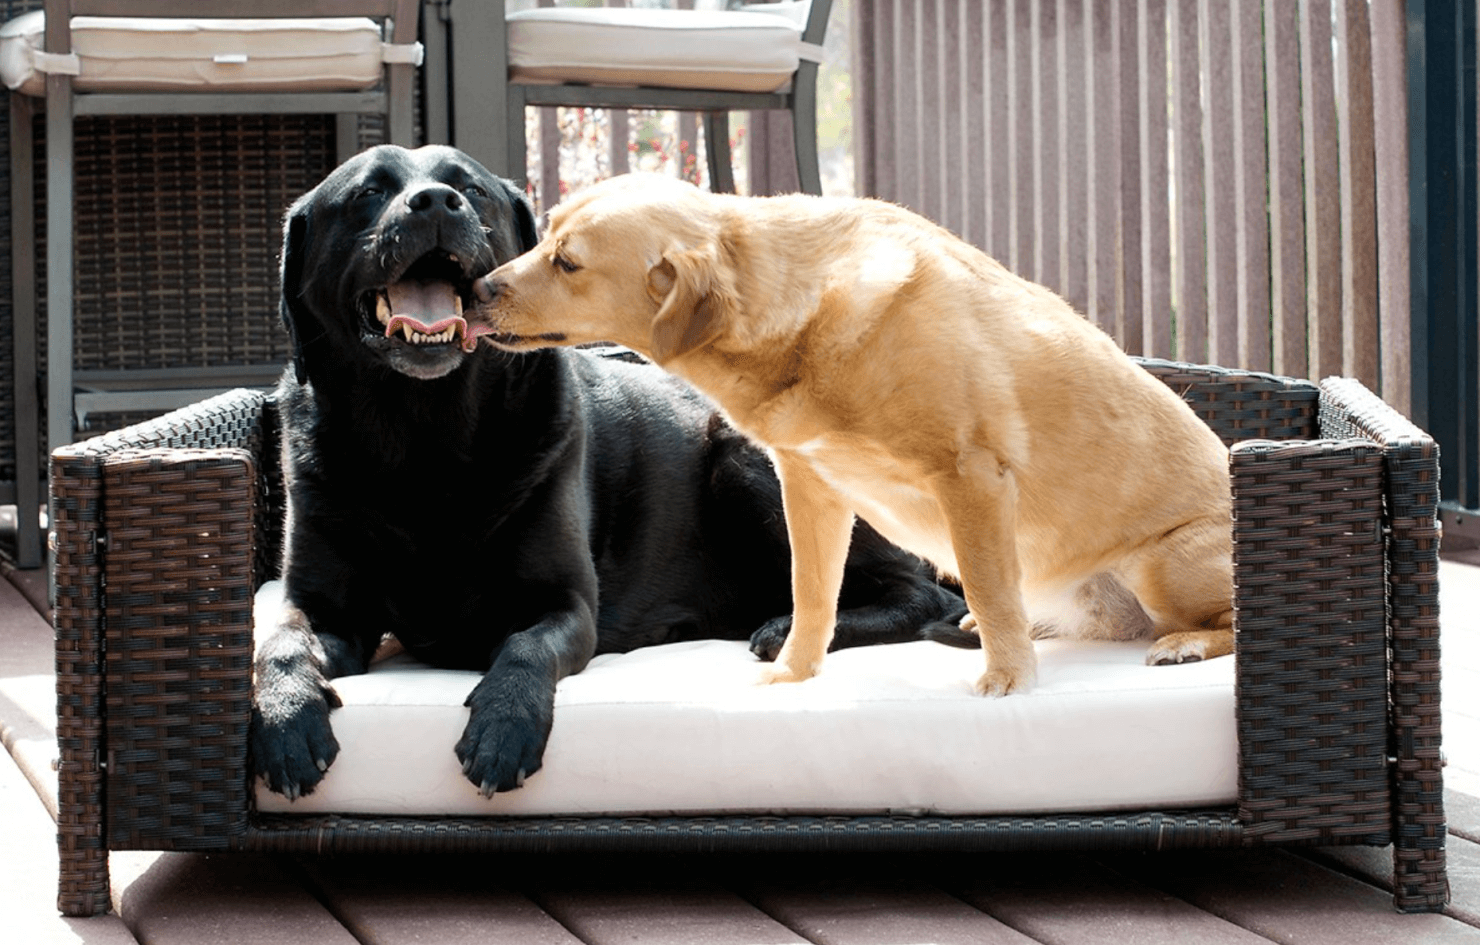 Labradors being affectionate on a rattan dog bed.